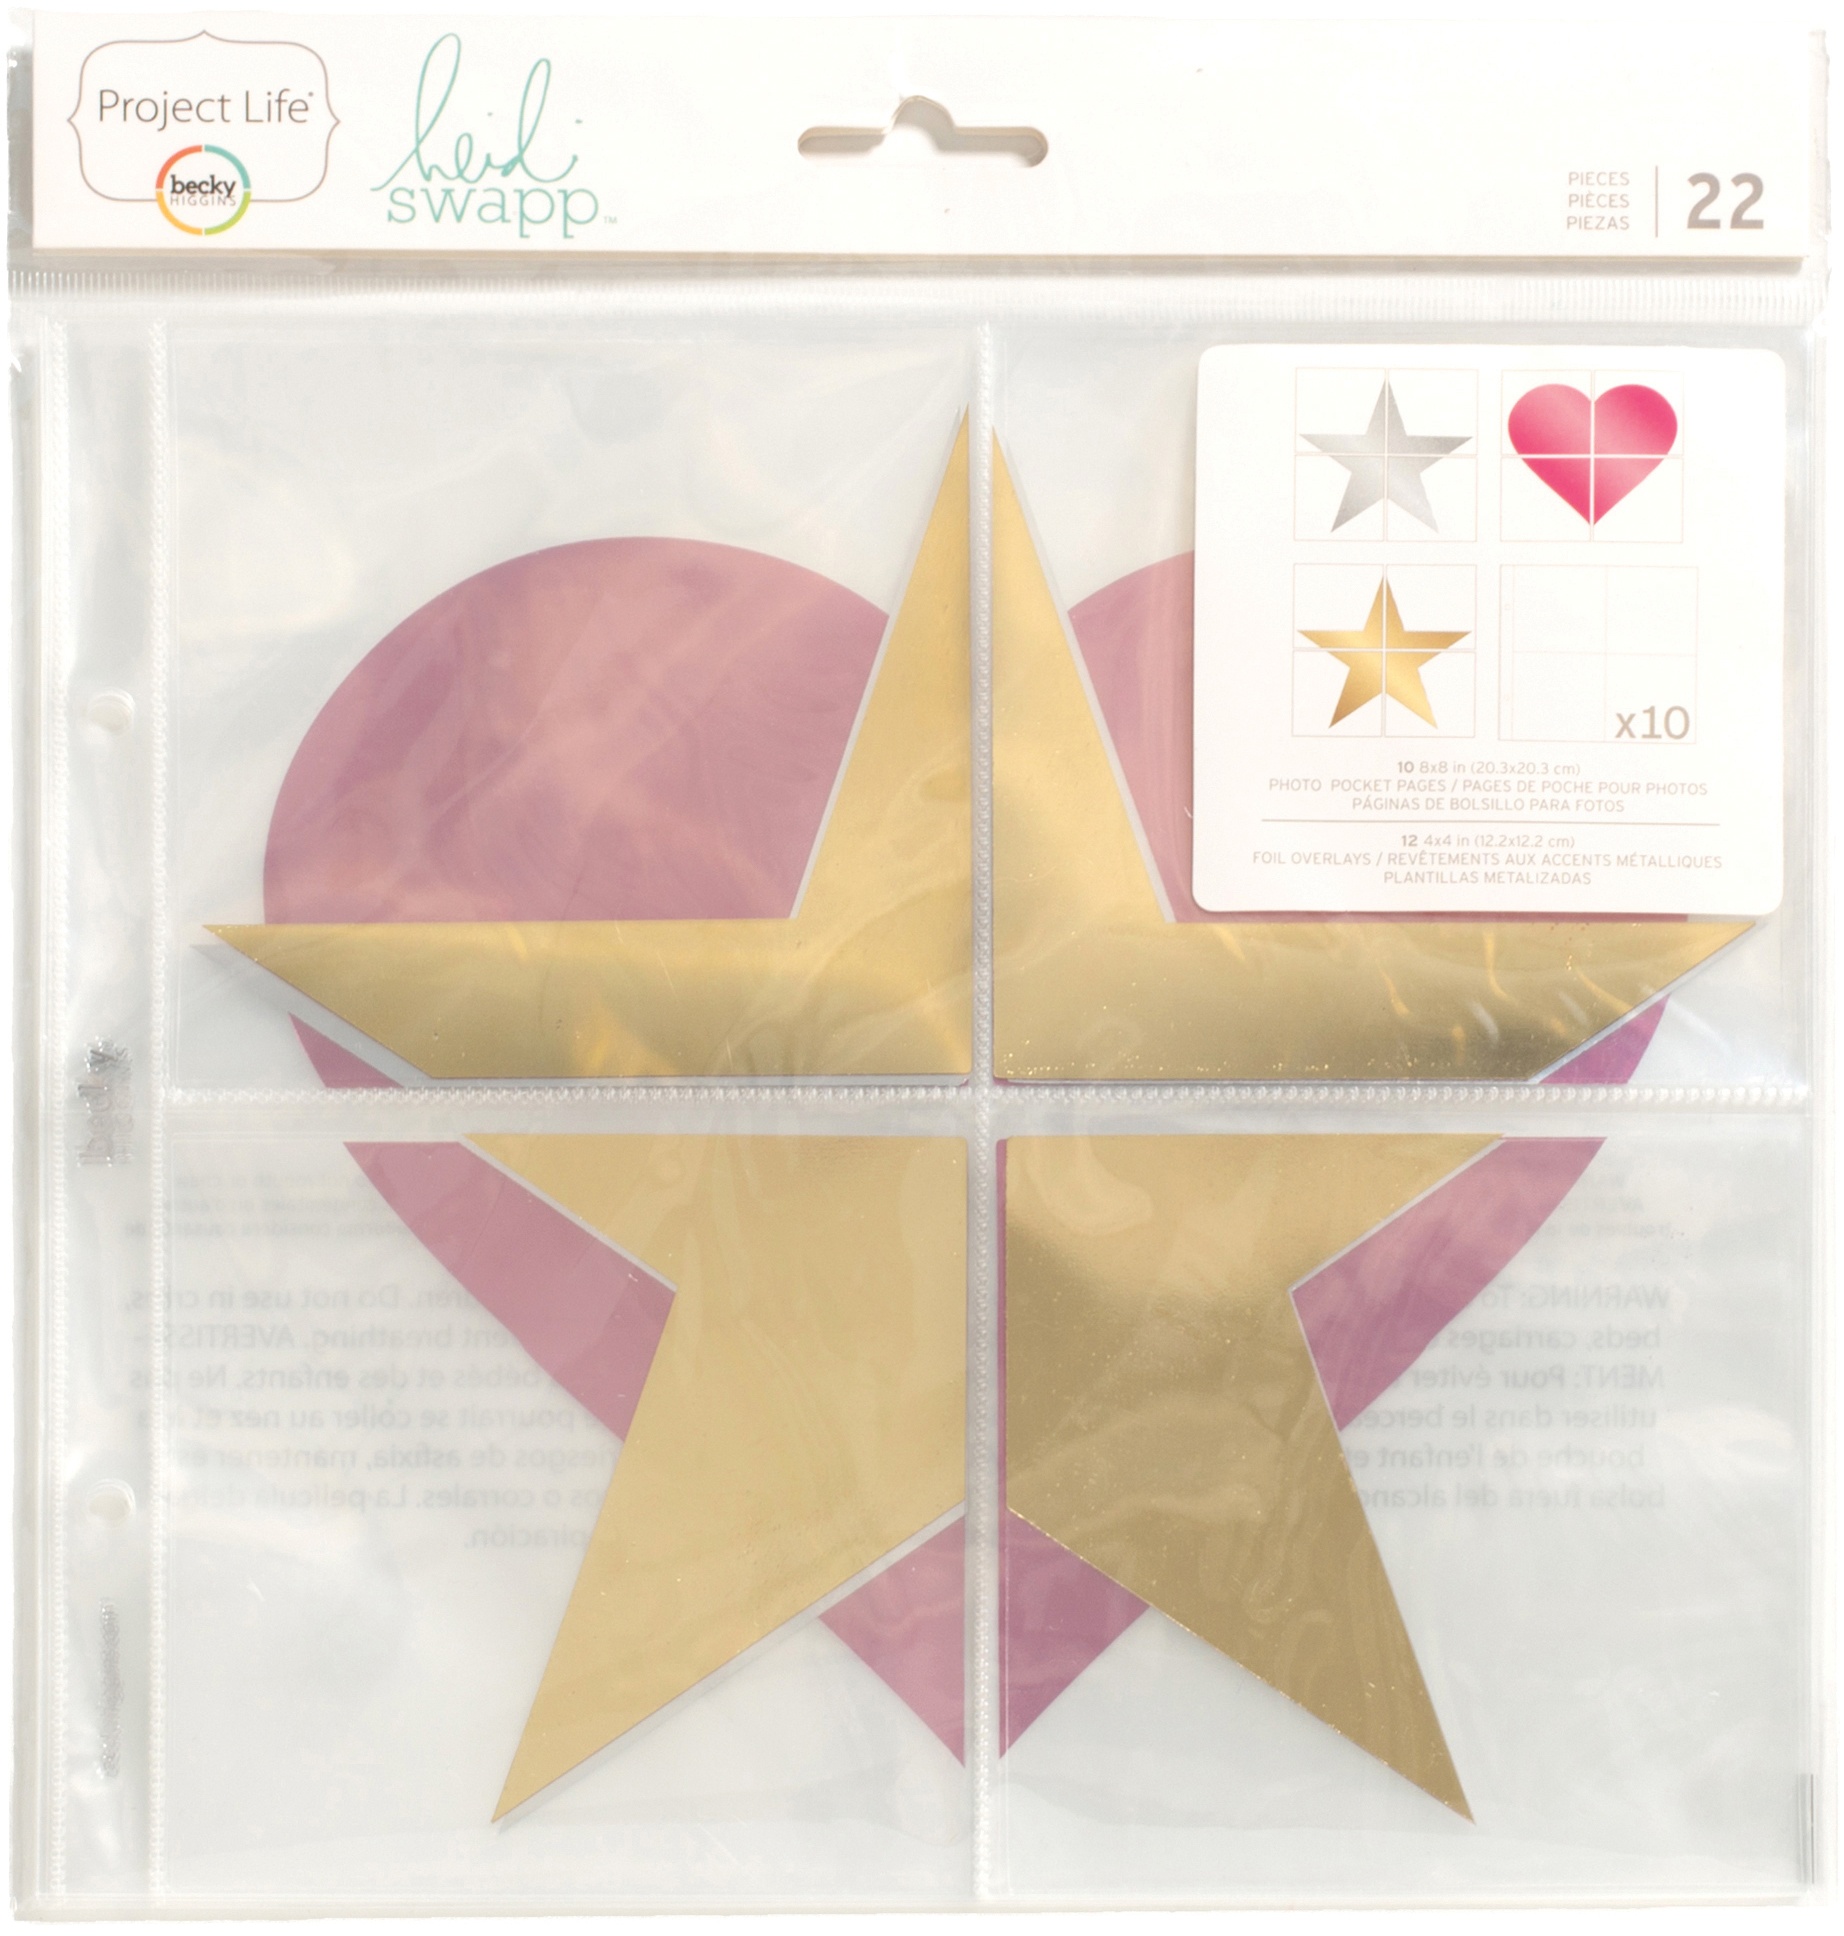 Project Life Pocket Pages 4X4 15/Pkg-Heidi Swapp 